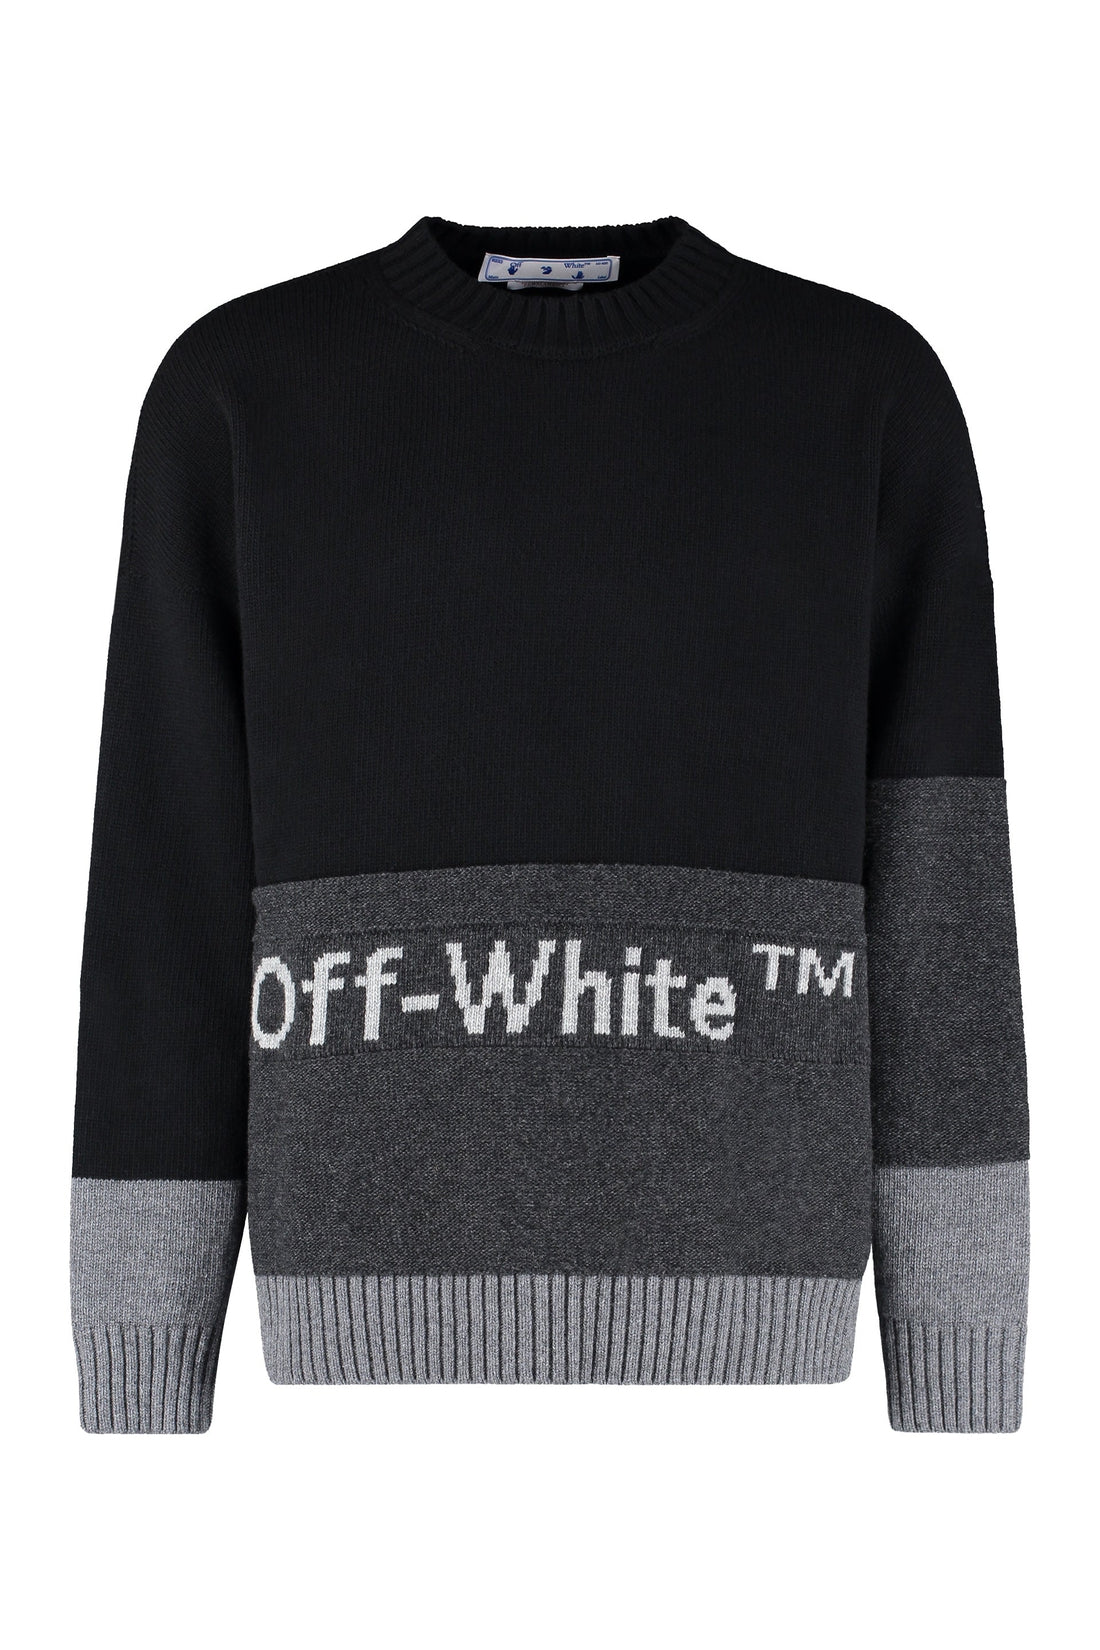 Off-White-OUTLET-SALE-Crew-neck wool sweater-ARCHIVIST